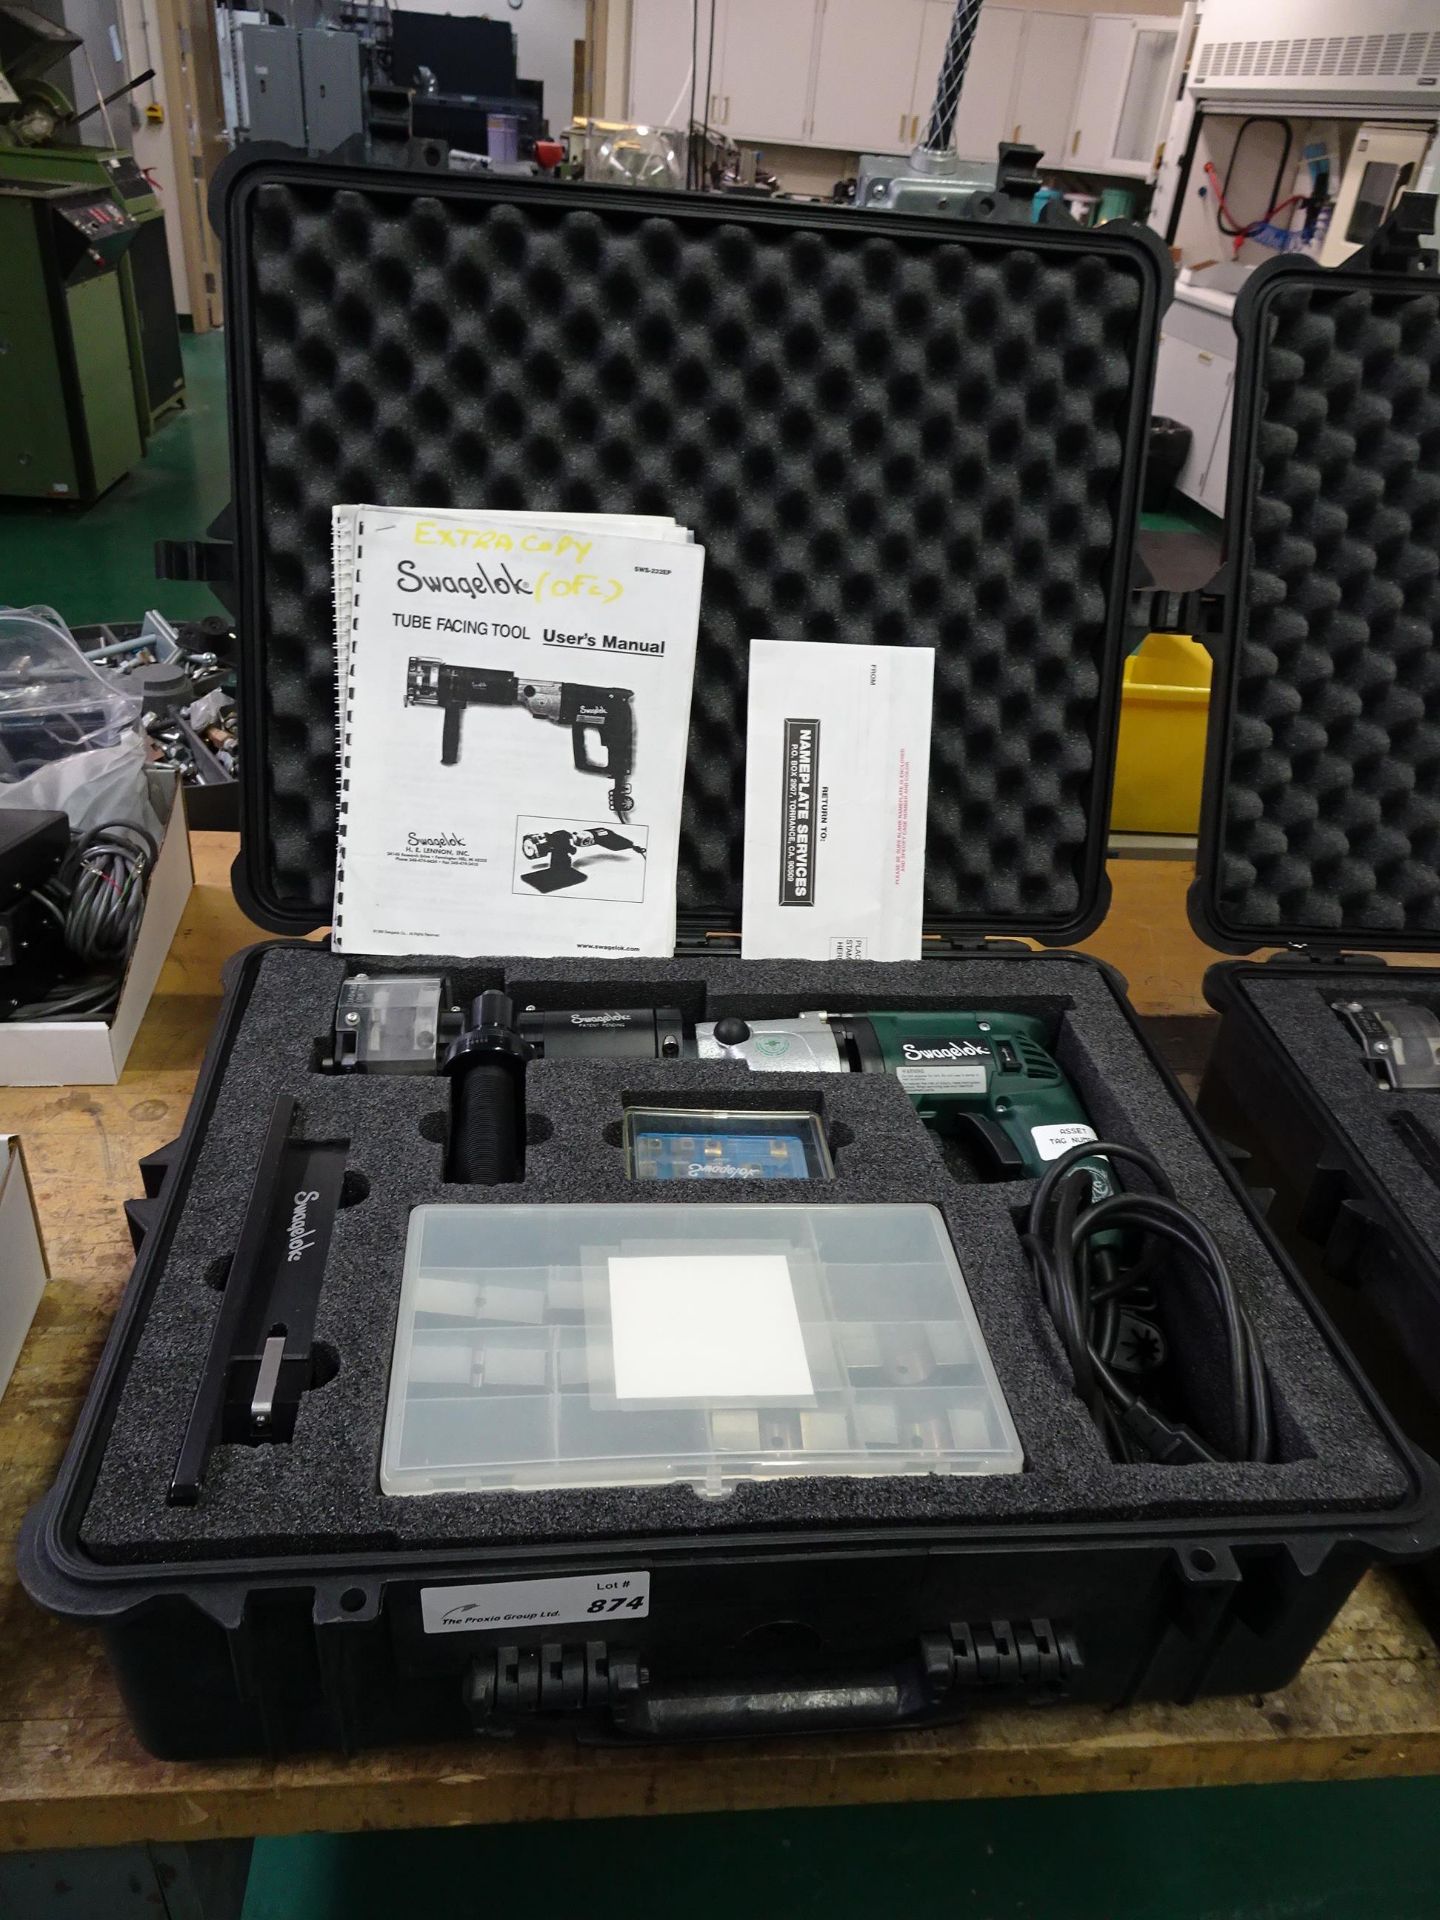 Swagelok Model SWS-EP232 2-Facing Tool Kit With (1) Metabo Hammer Drill, (2) Facing Unit, Associated